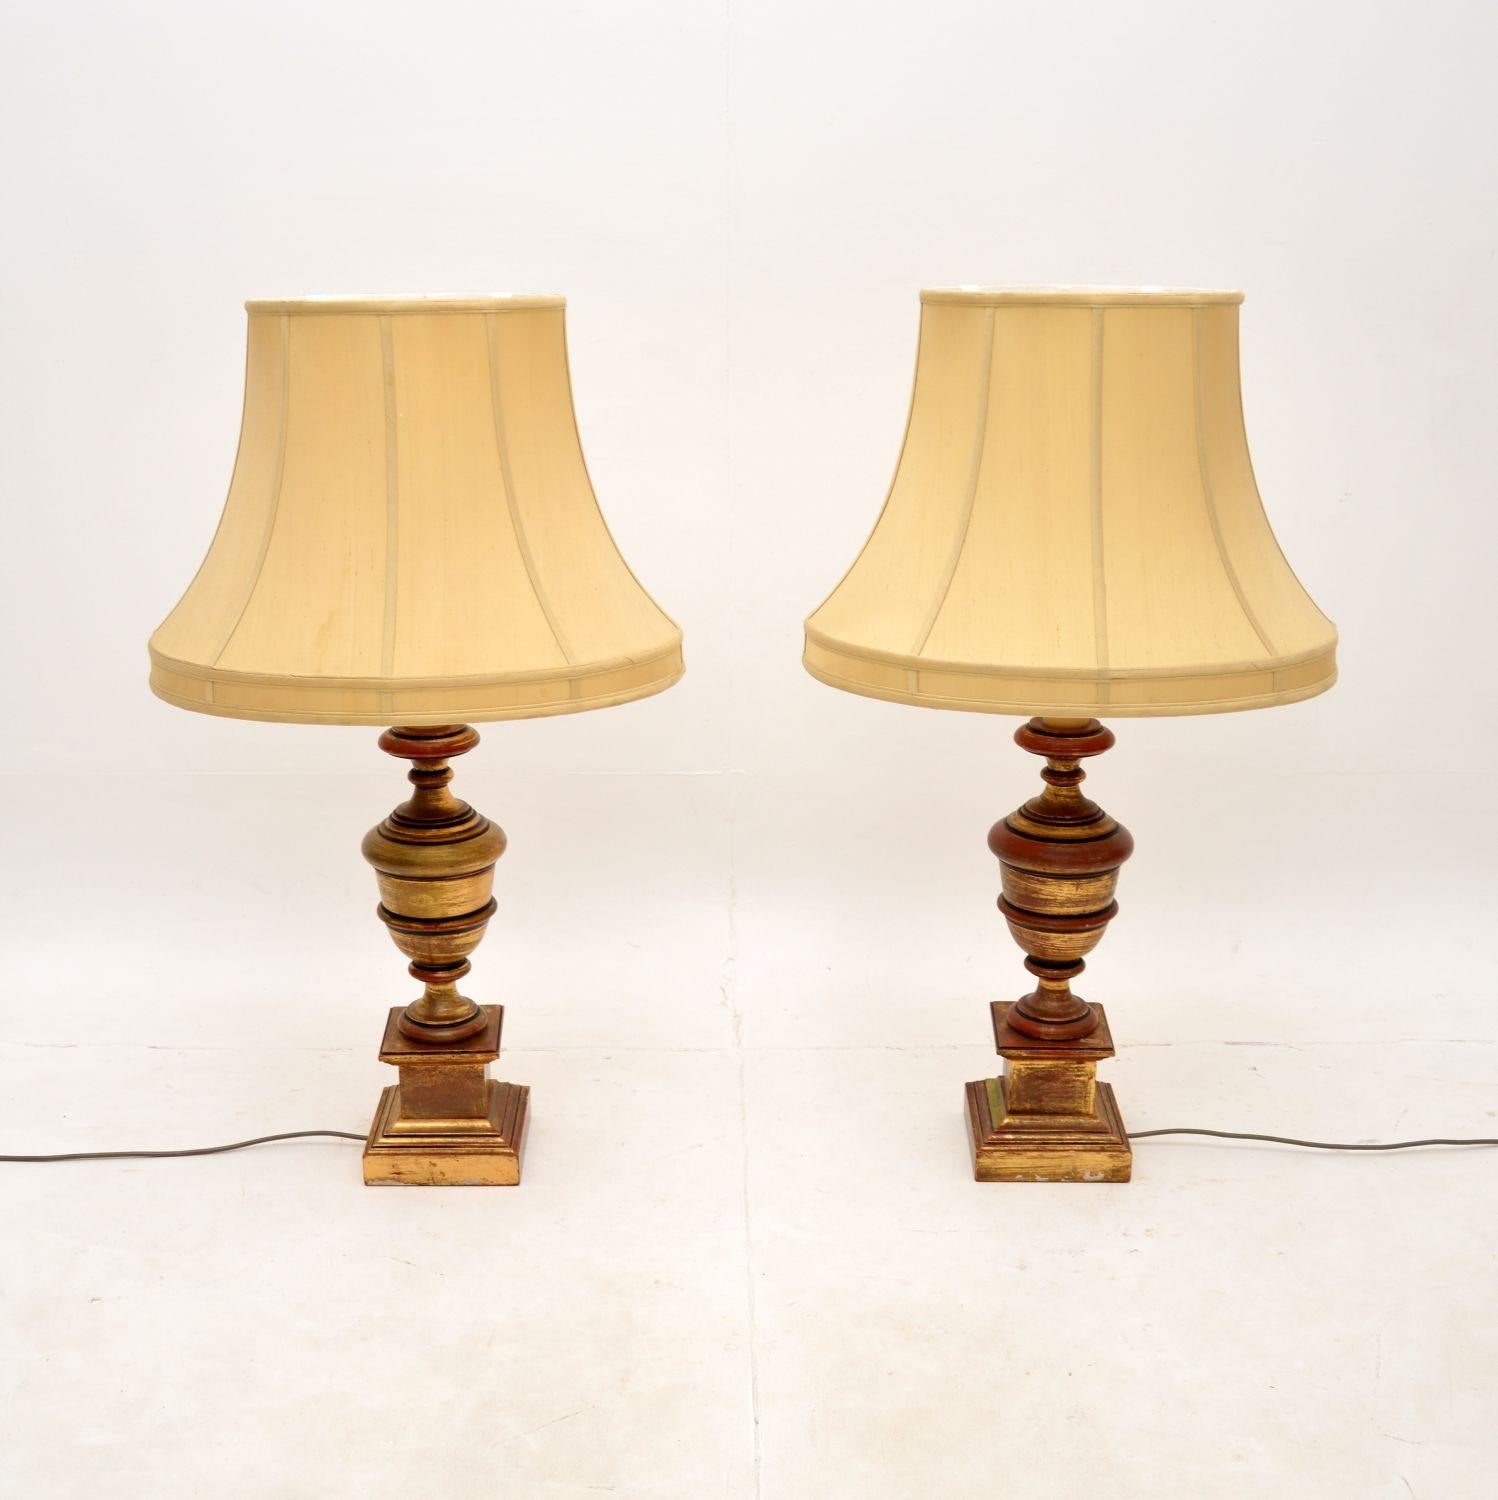 Neoclassical Pair of Antique Gilt Wood Table Lamps For Sale